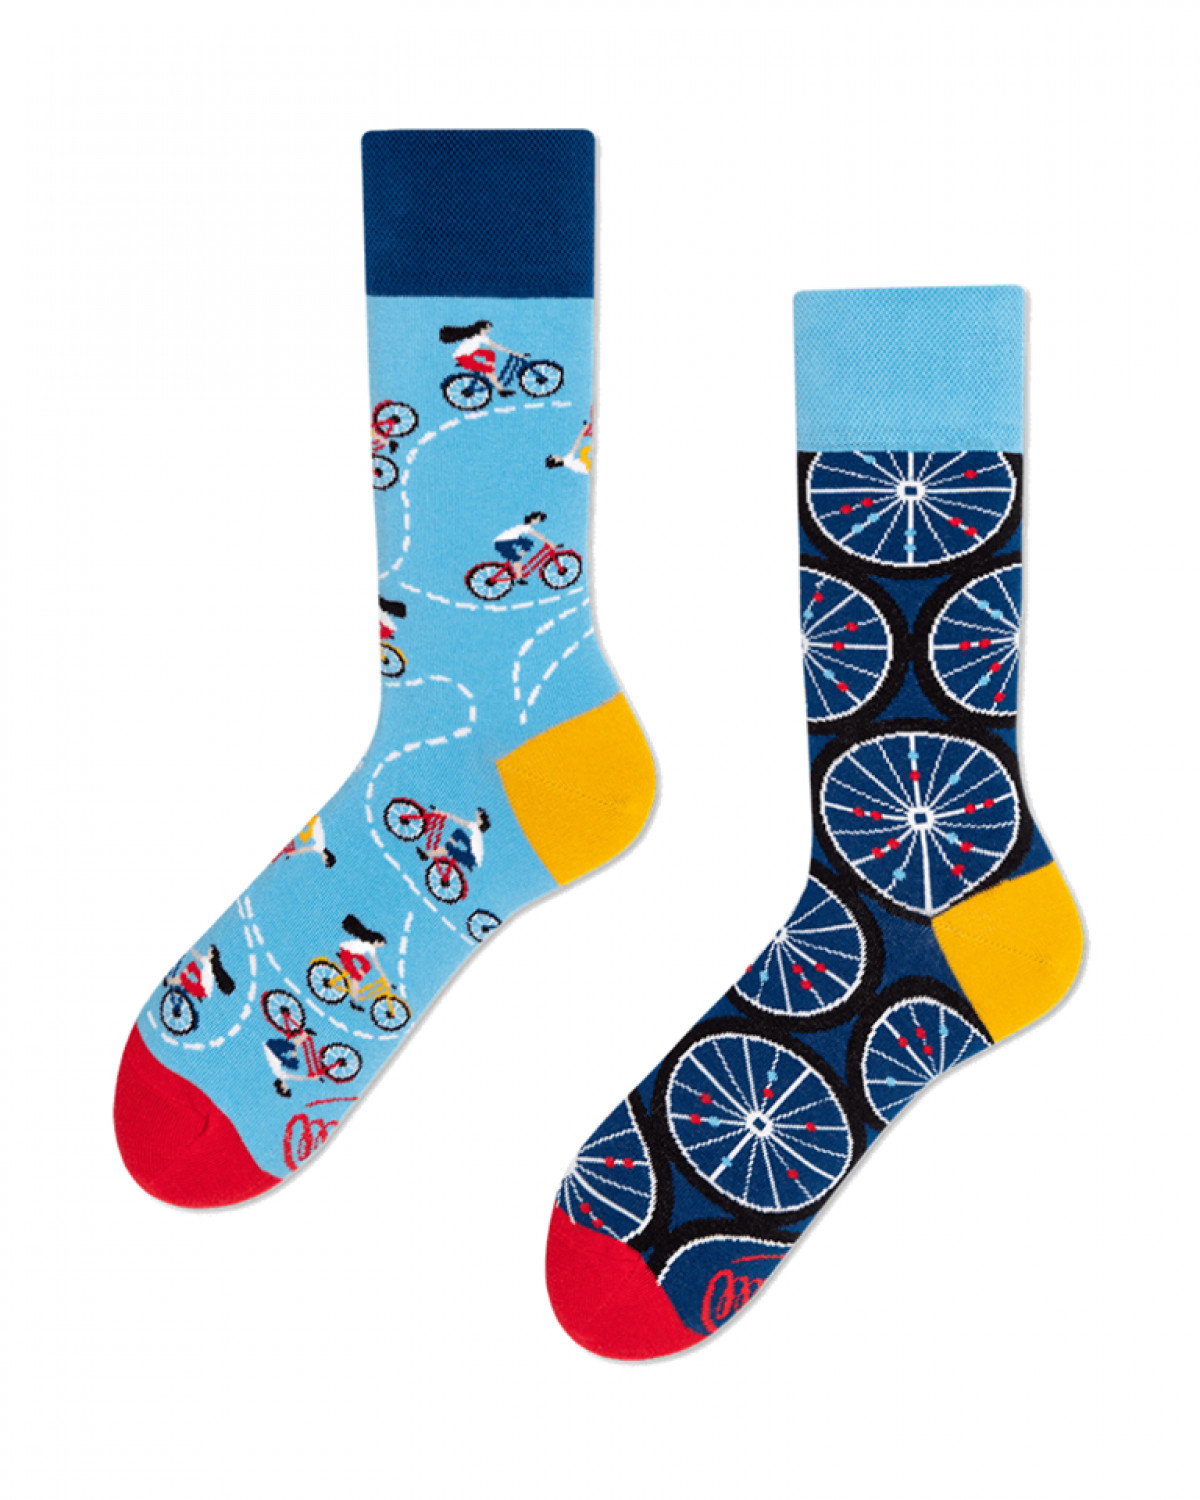 Chaussettes Many Morning - The bicycles - Boutique Toup'tibou - photo 6